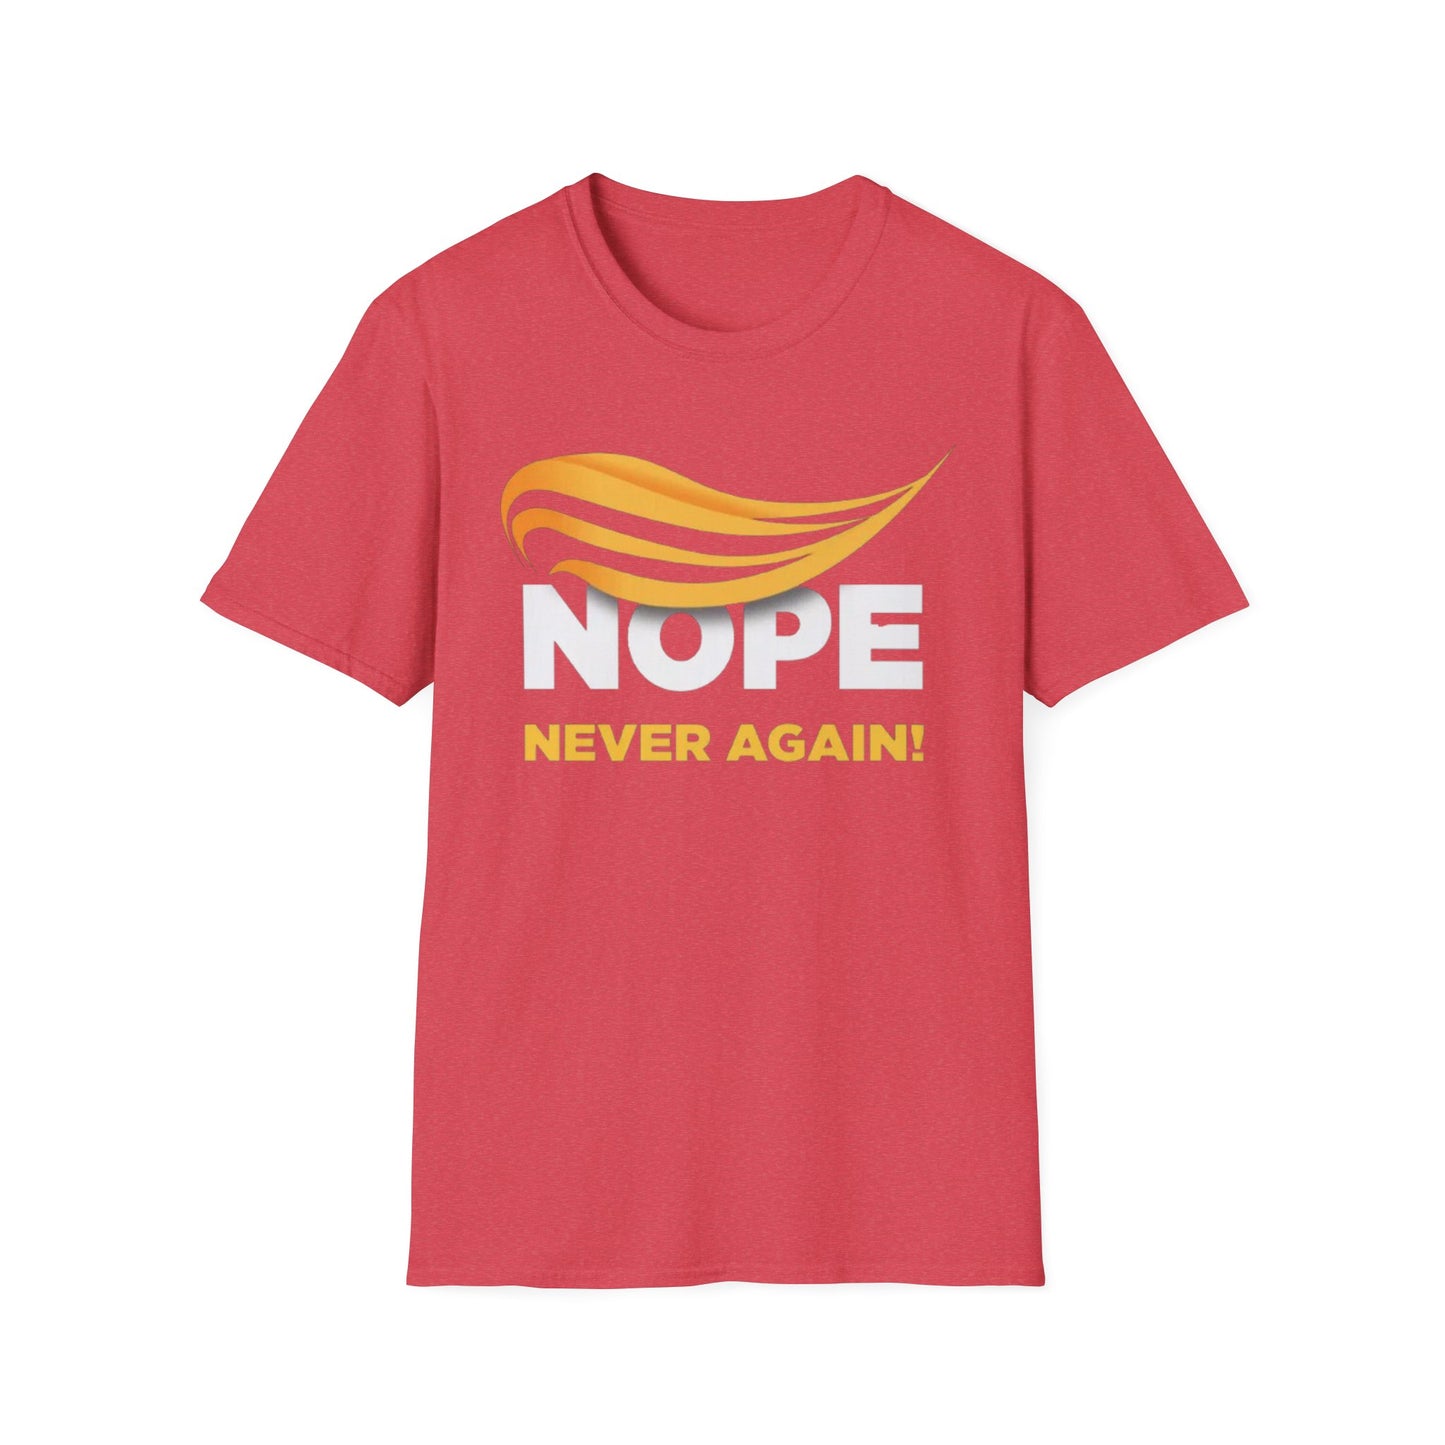 Nope Never Again - Unisex Softstyle T-Shirt